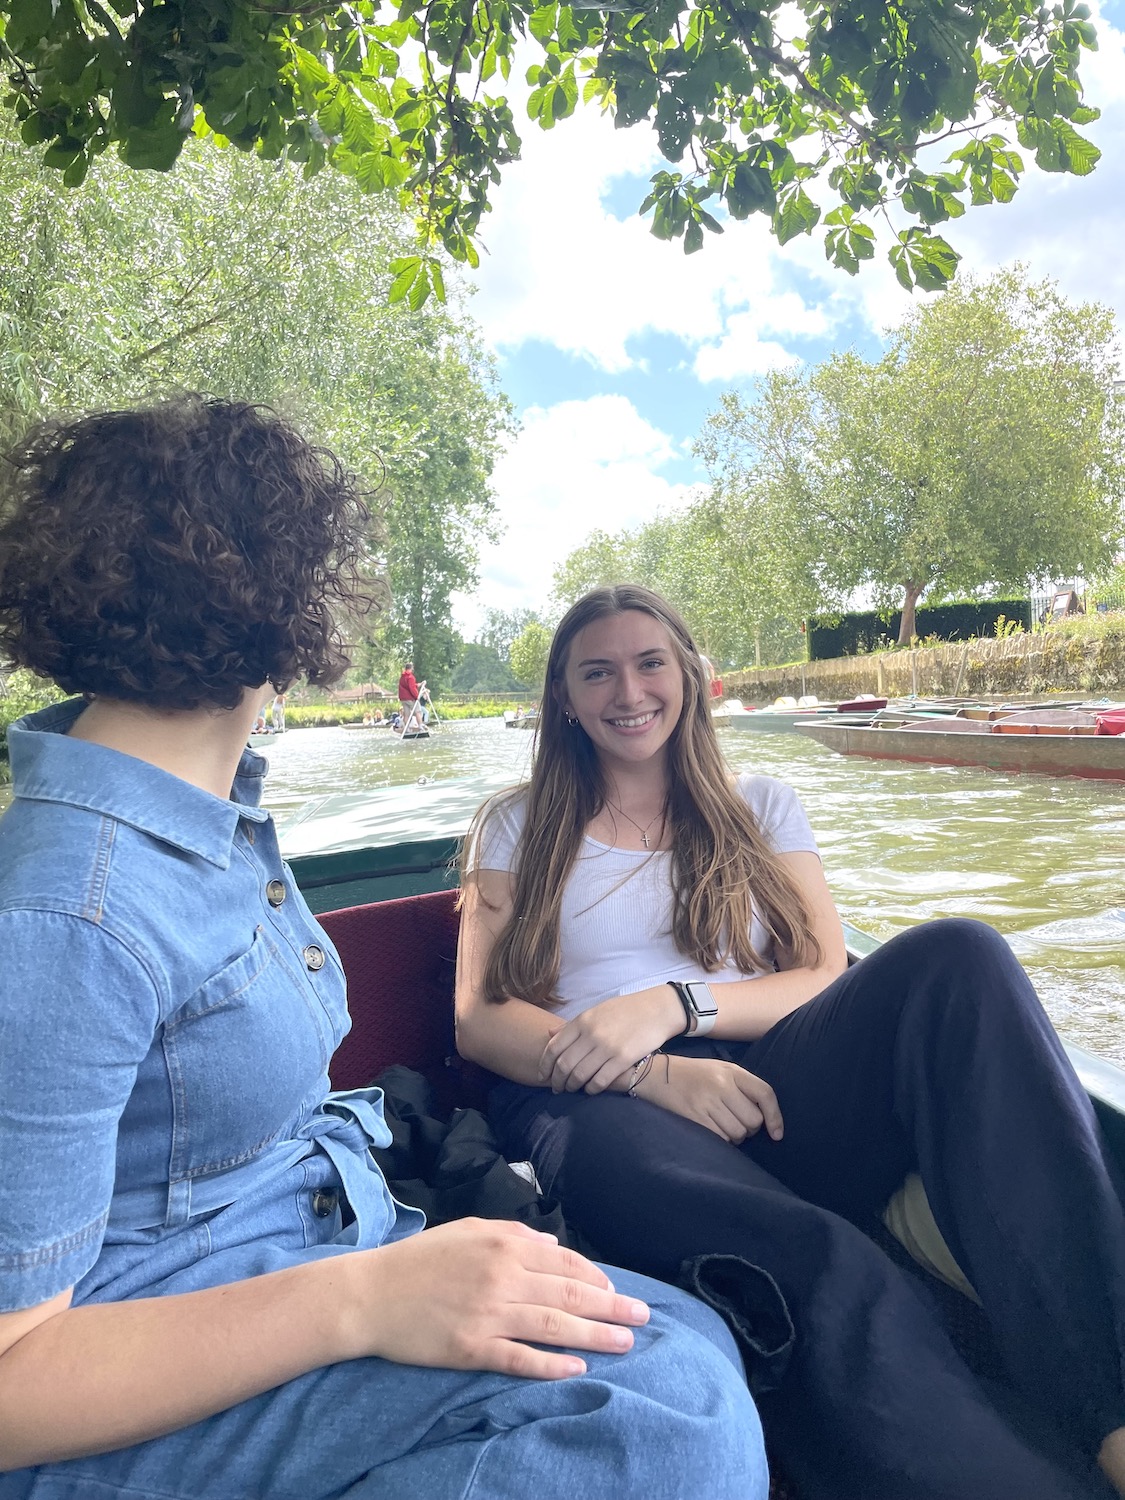 Marietta College student Kaylie Ward ’24 poses for a photo on a boat in Oxford during her Education Abroad trip to London